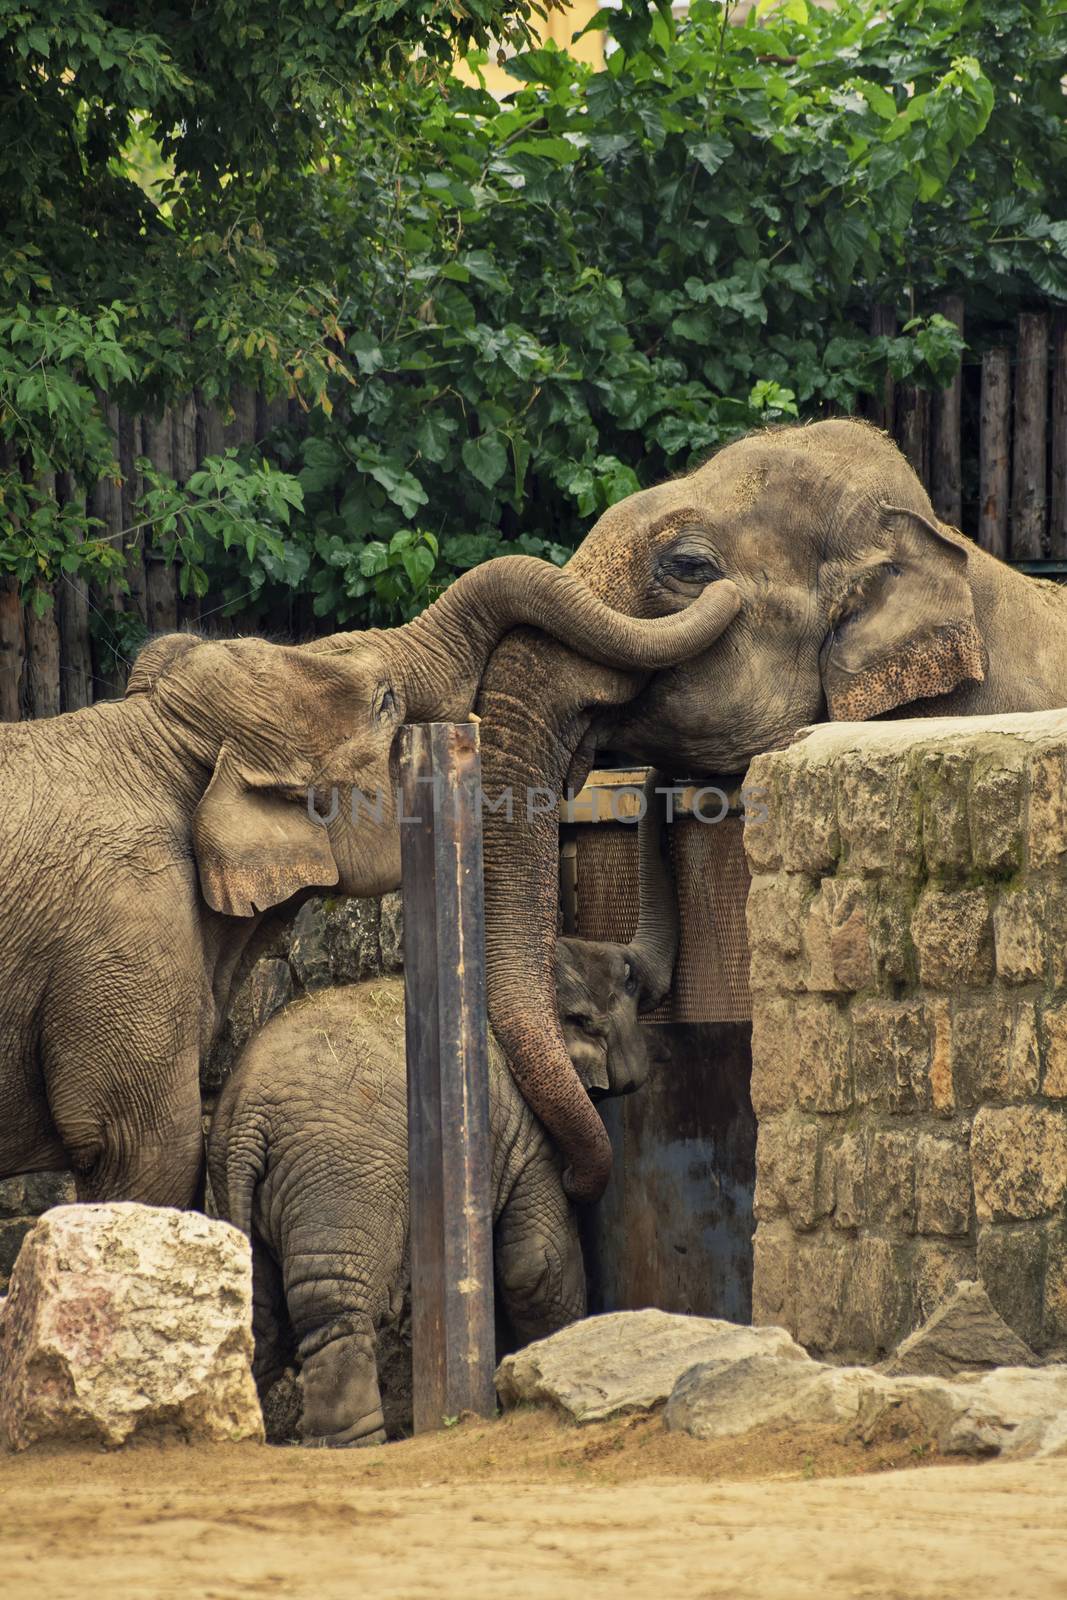 Separated family of elephants hugging each other by Mendelex